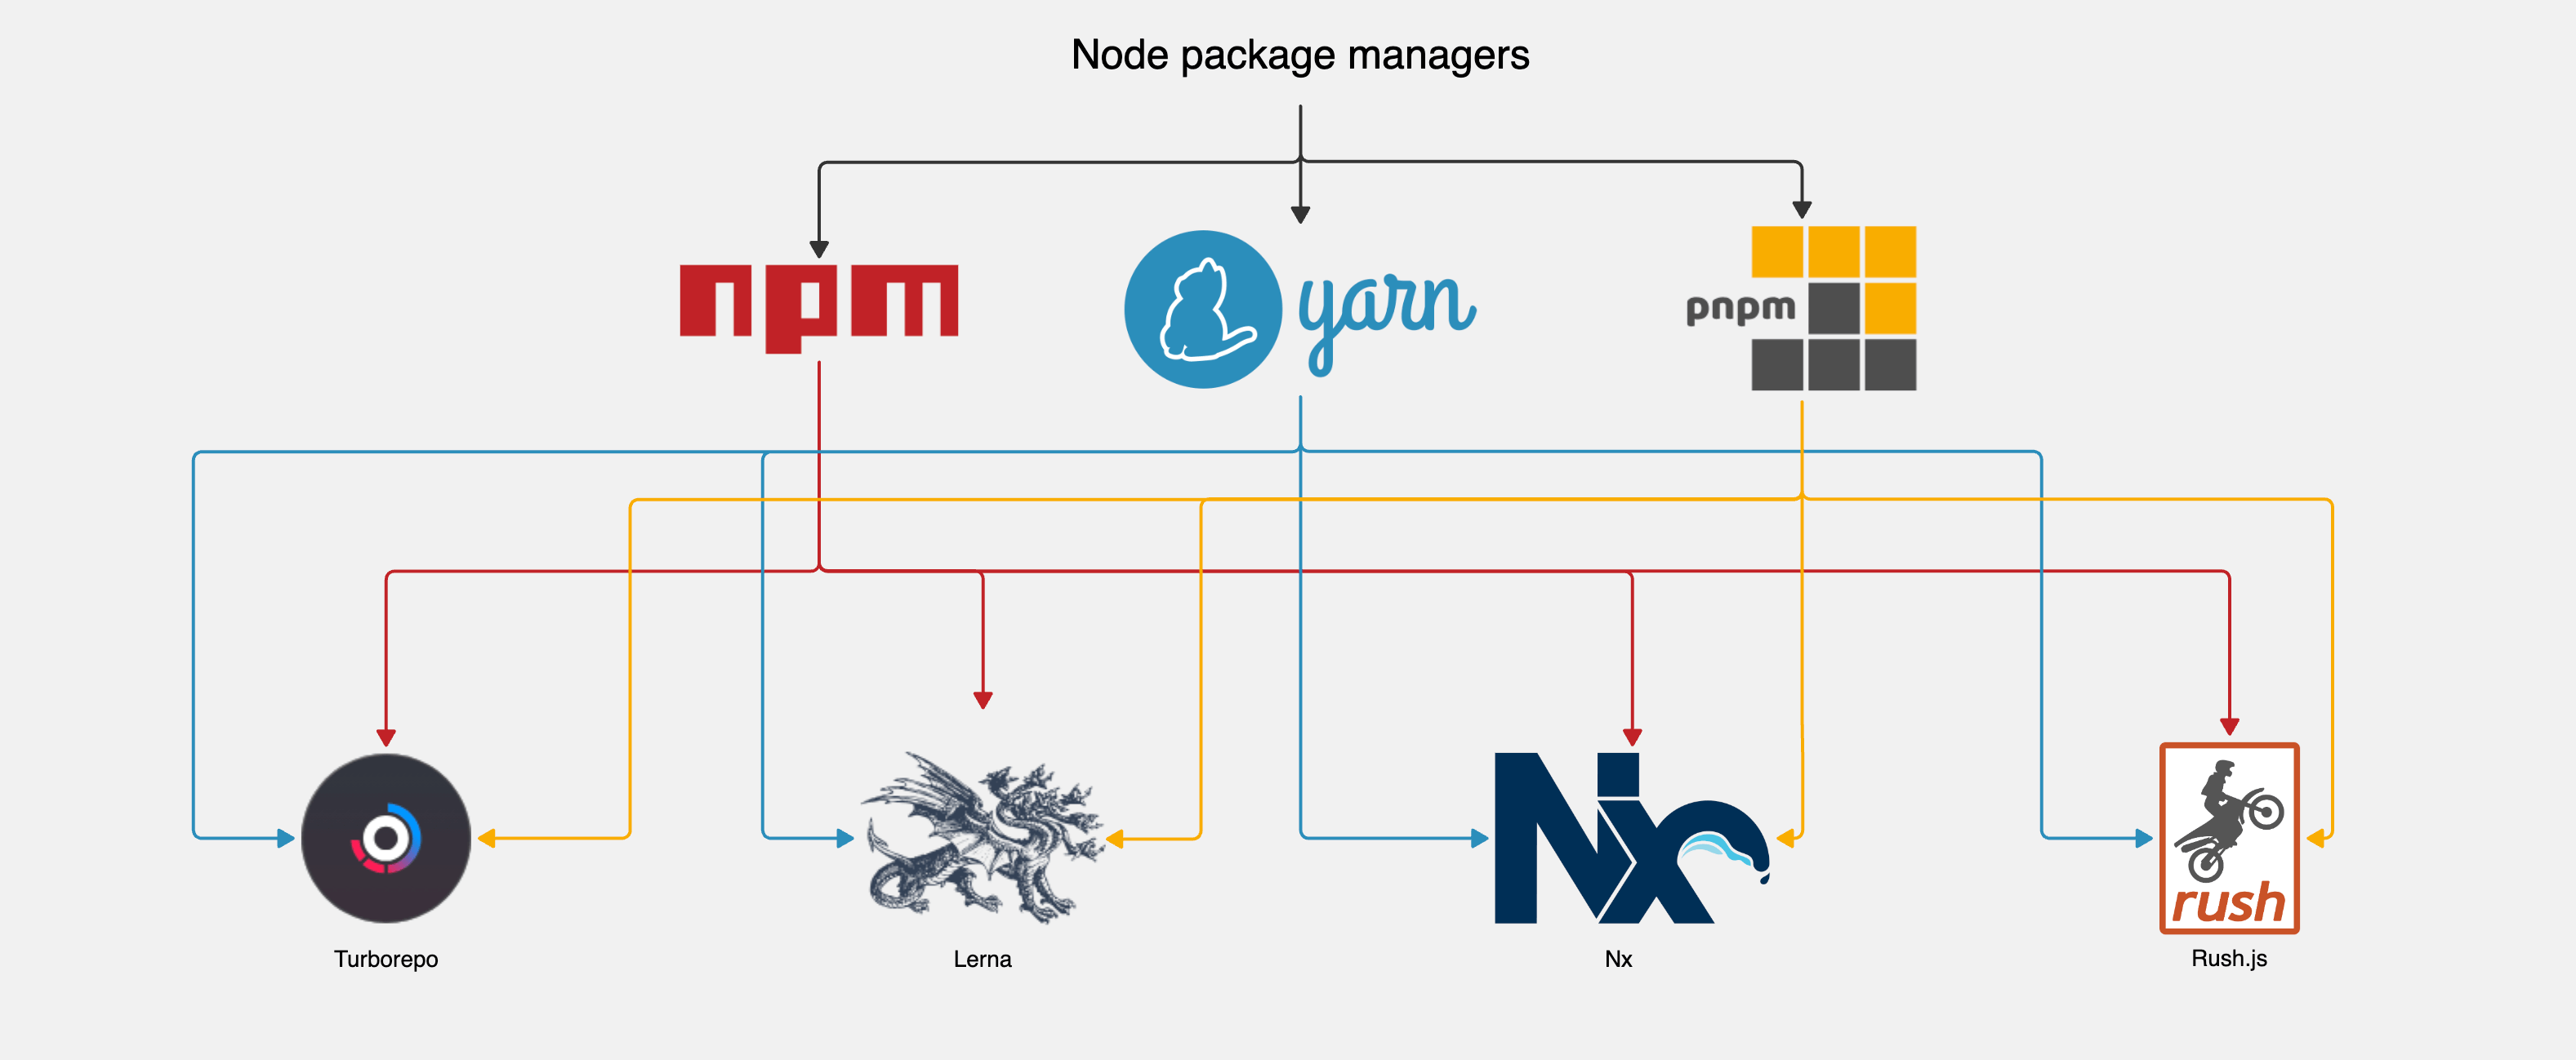 Node package managers